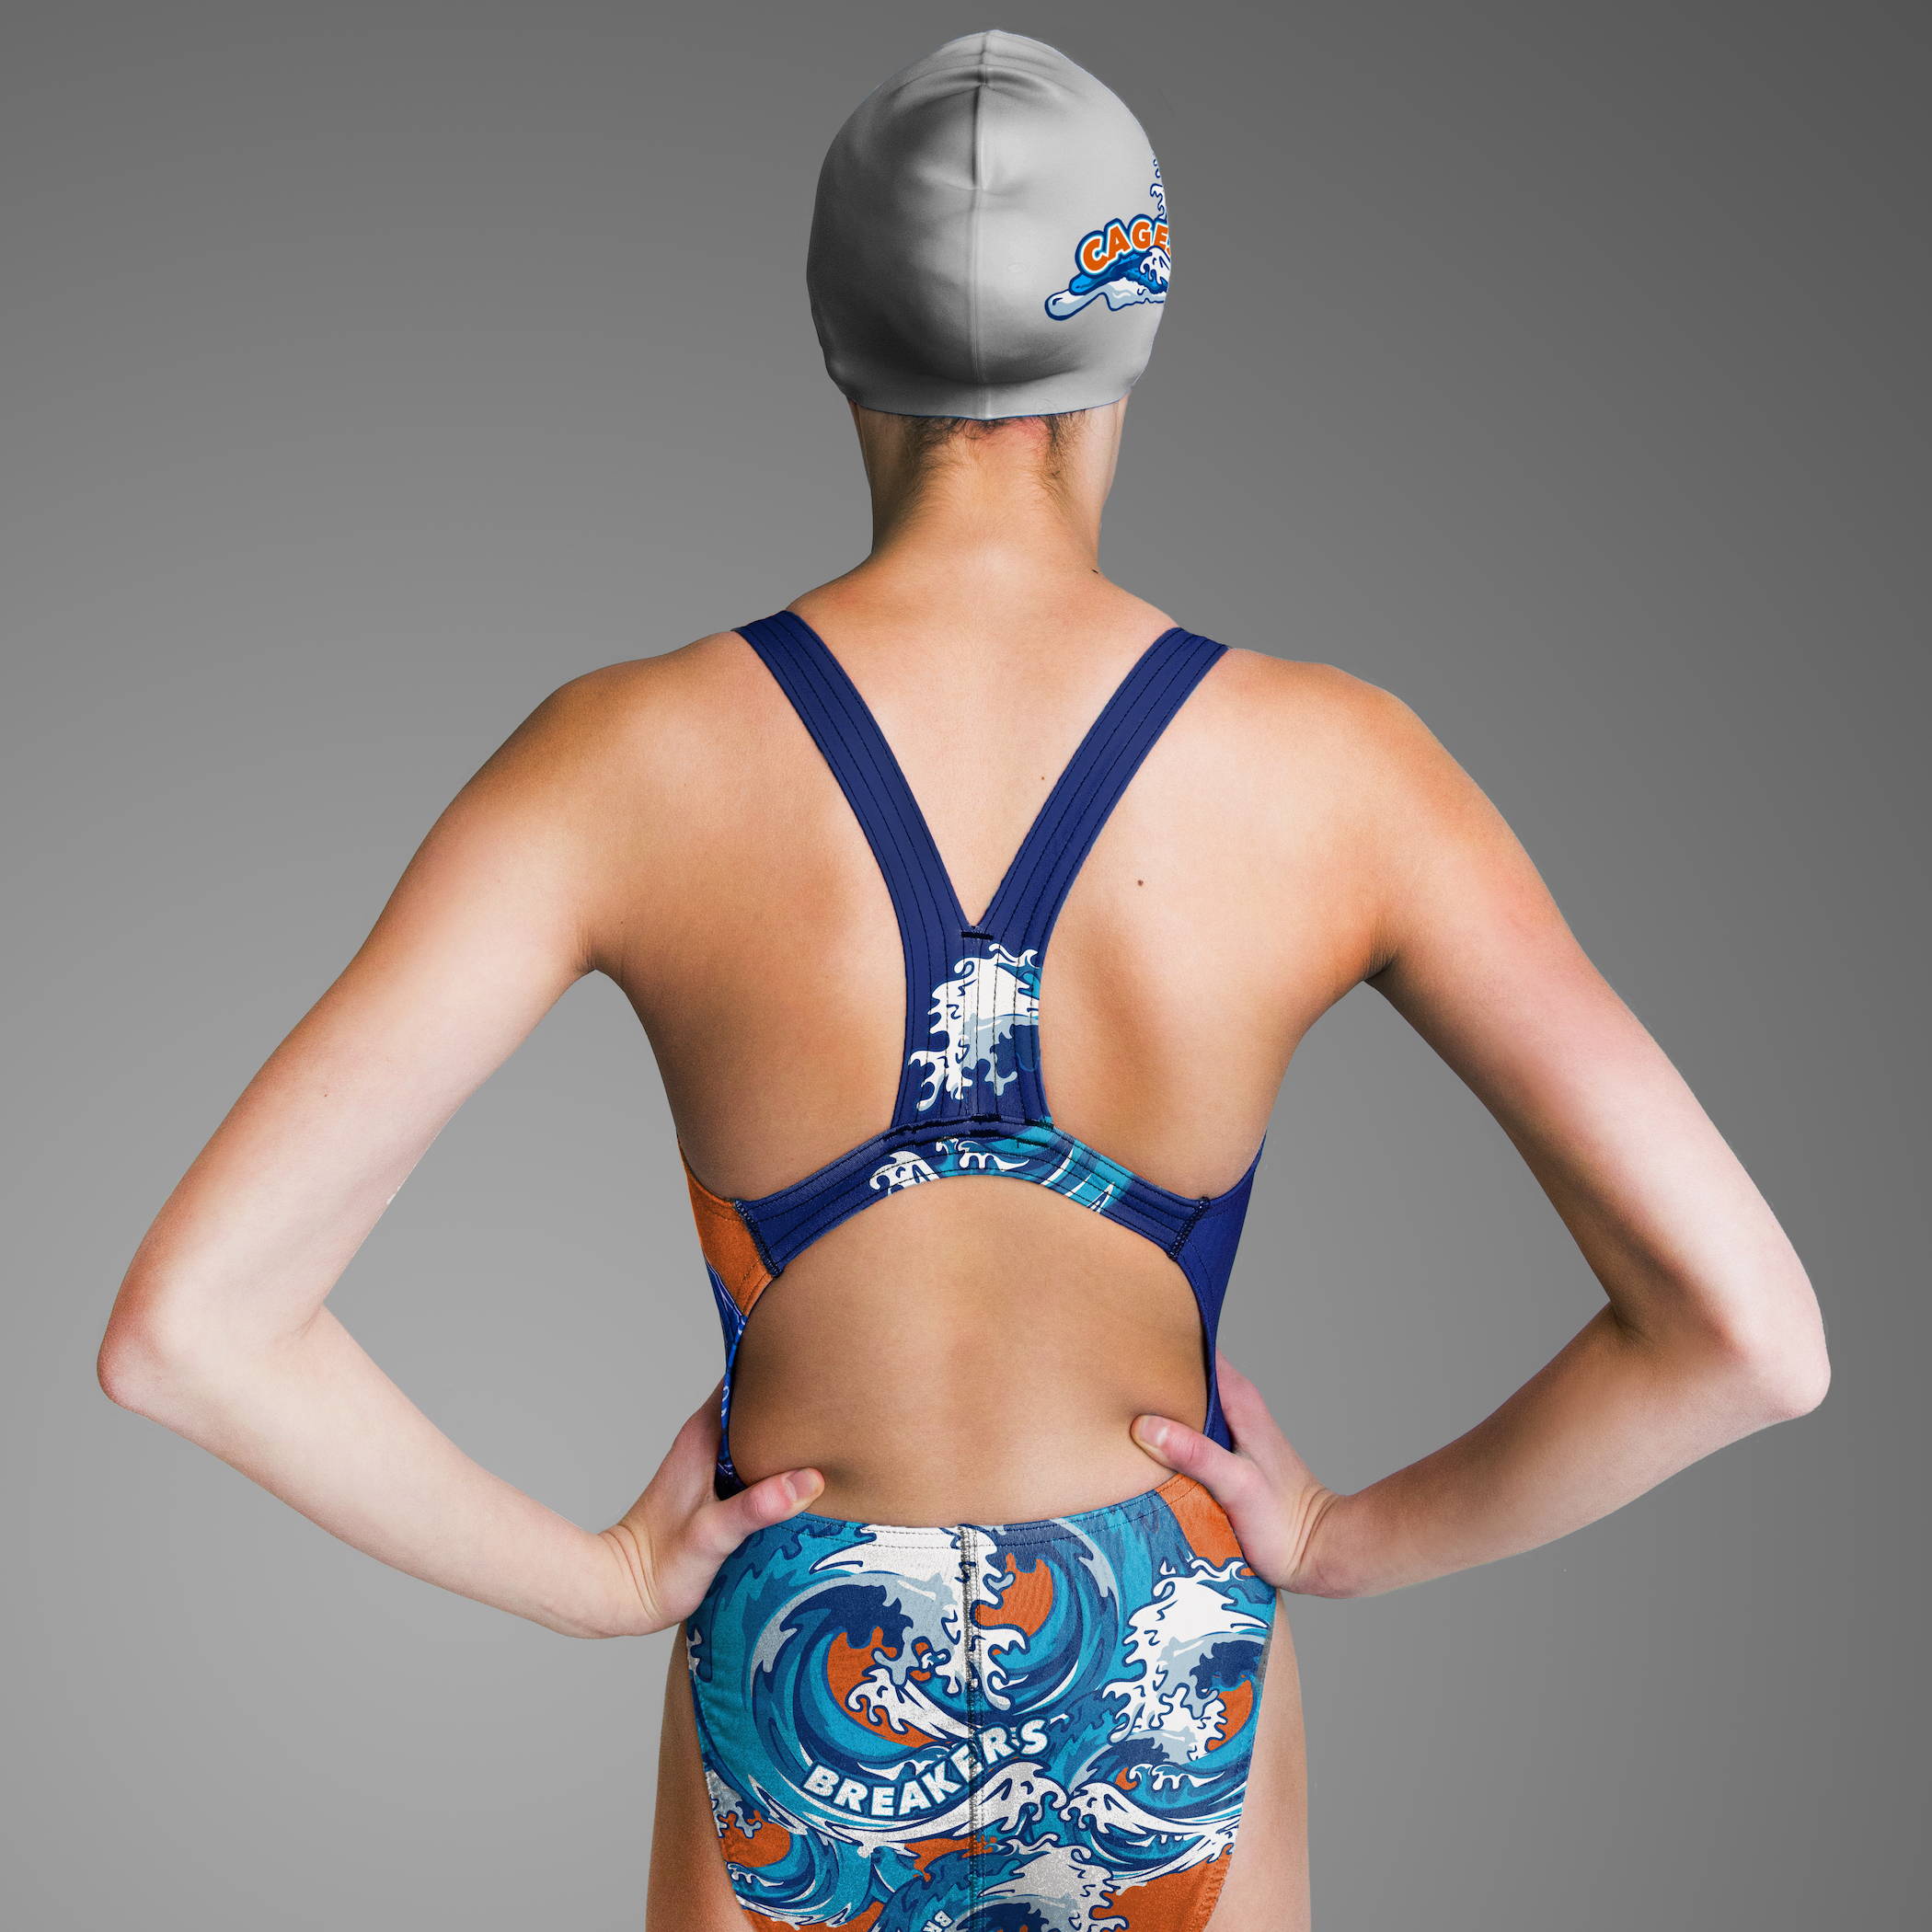 zone swimwear designs custom swimsuits for teams and custom team swimsuits